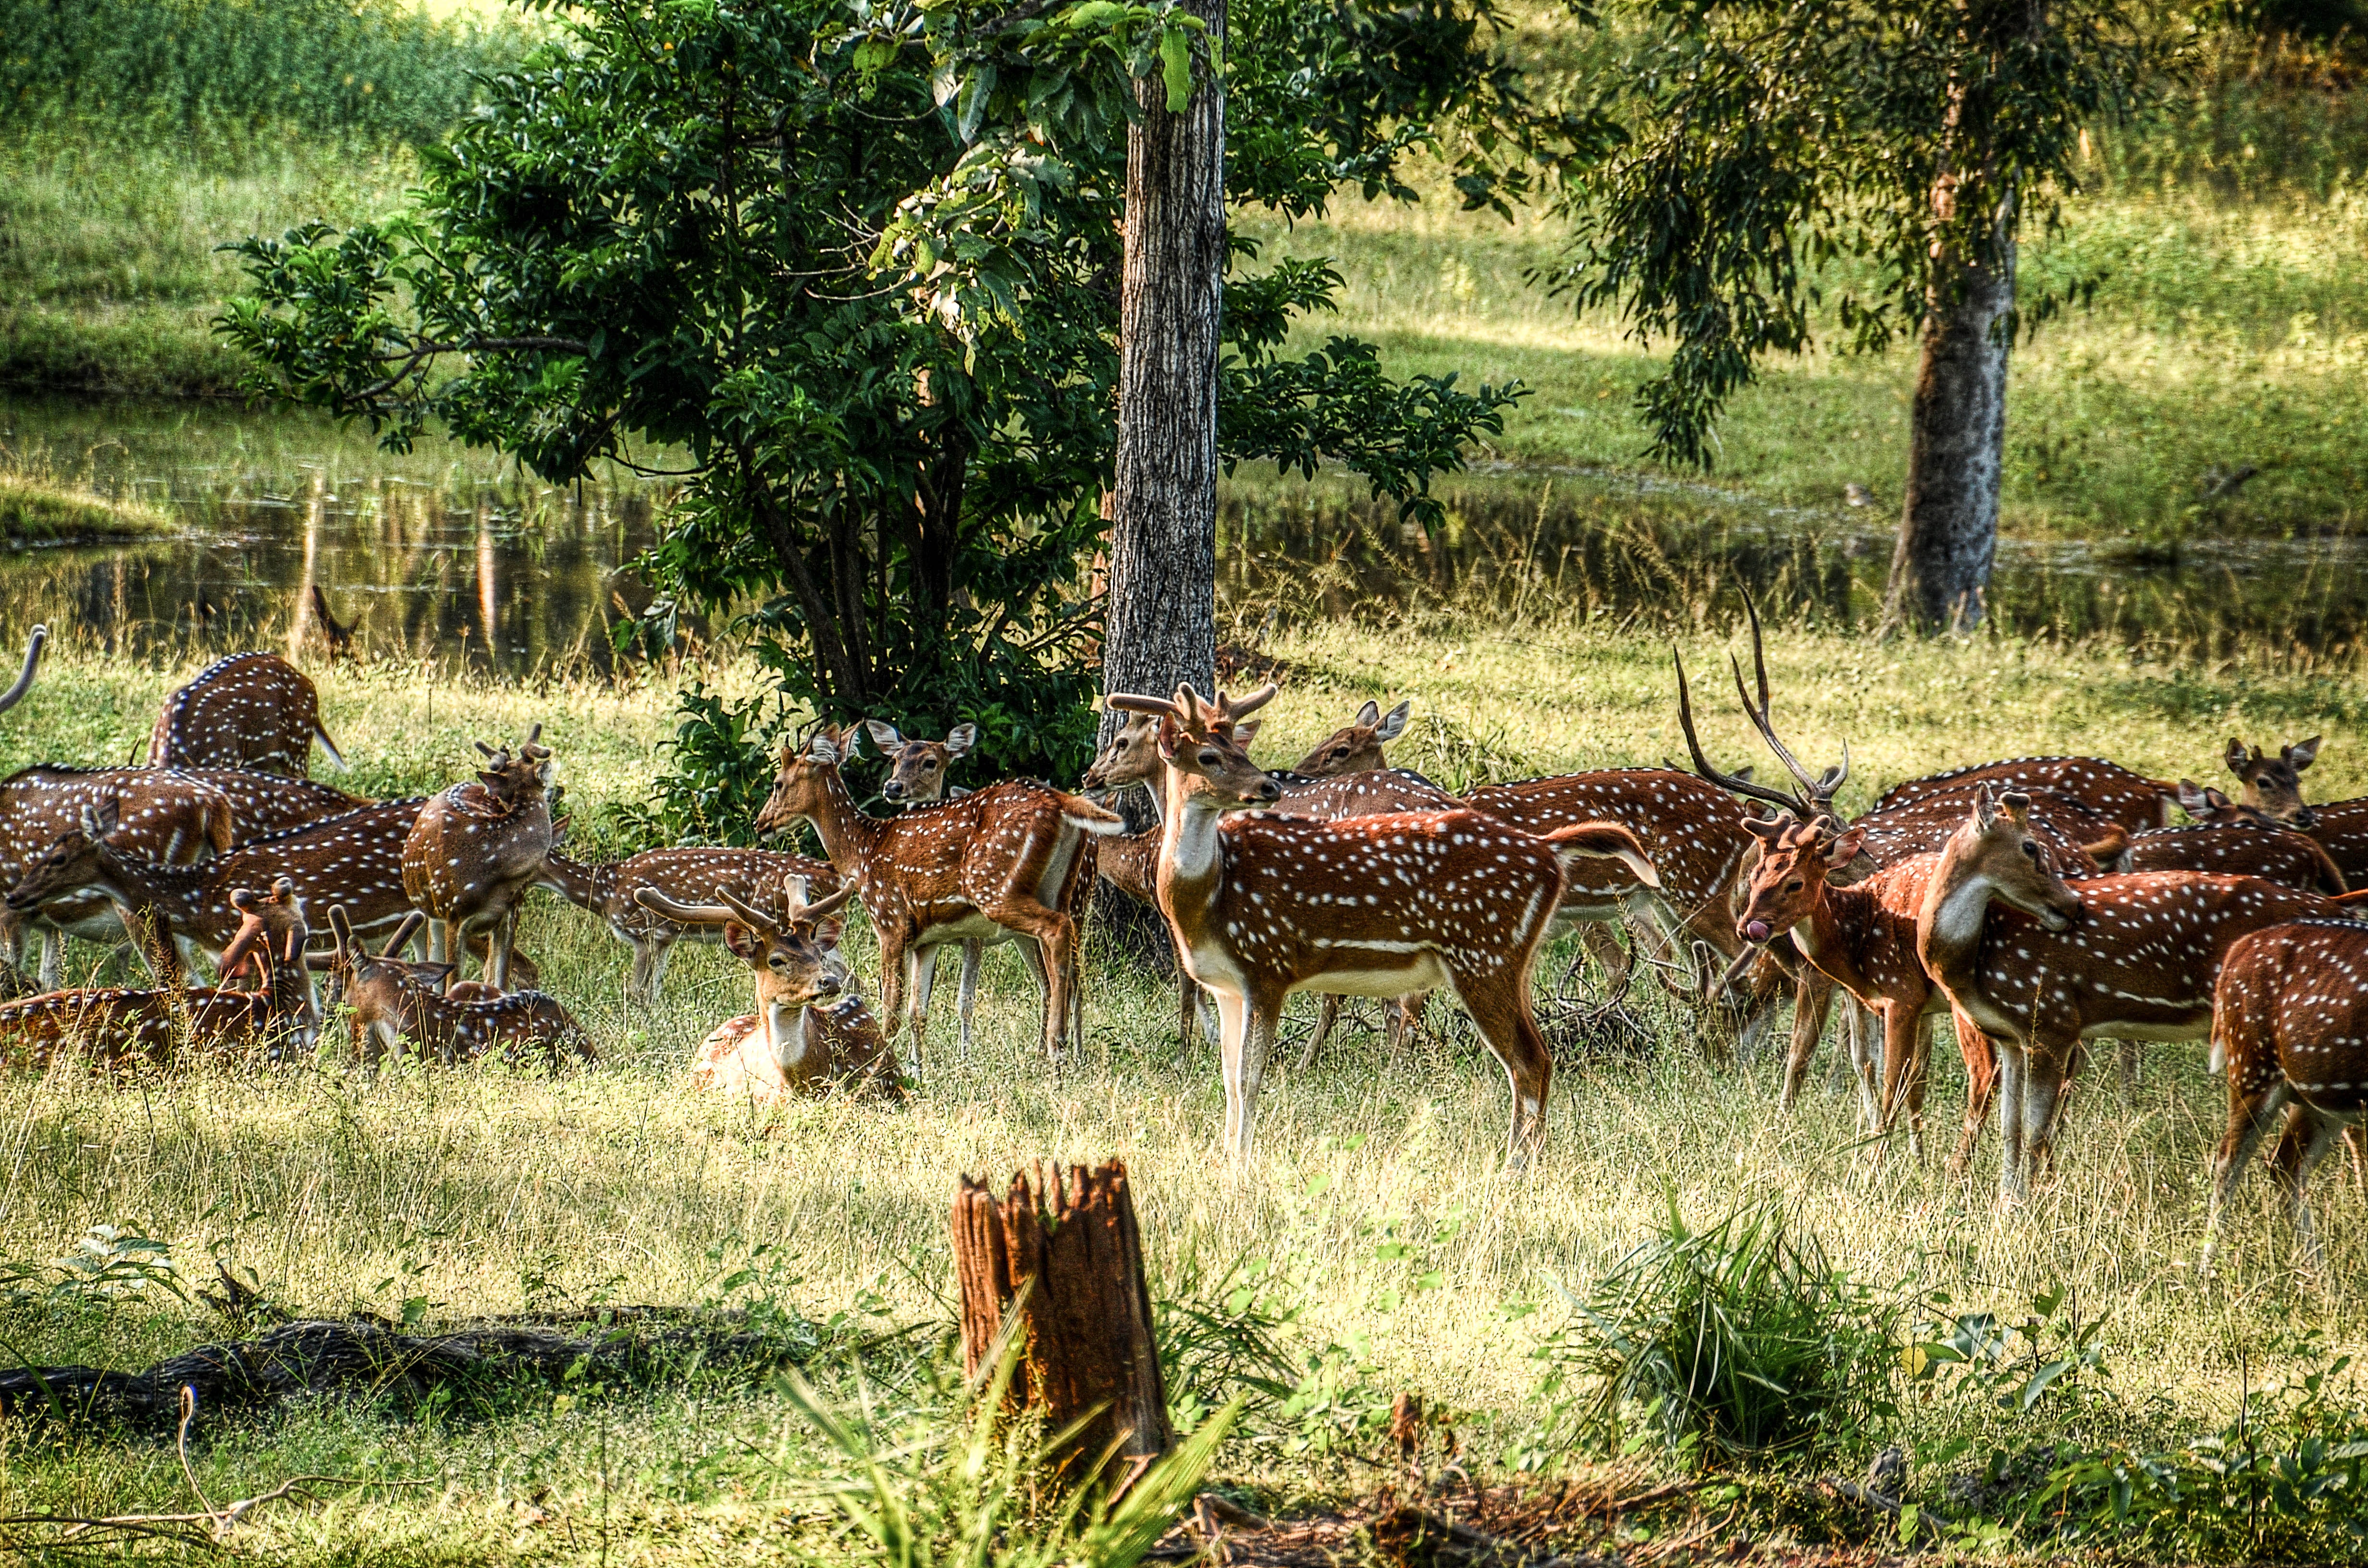 Group of Deer on Green Field at Daytime, Animal photography, Horns, Wilderness, Wild animals, HQ Photo